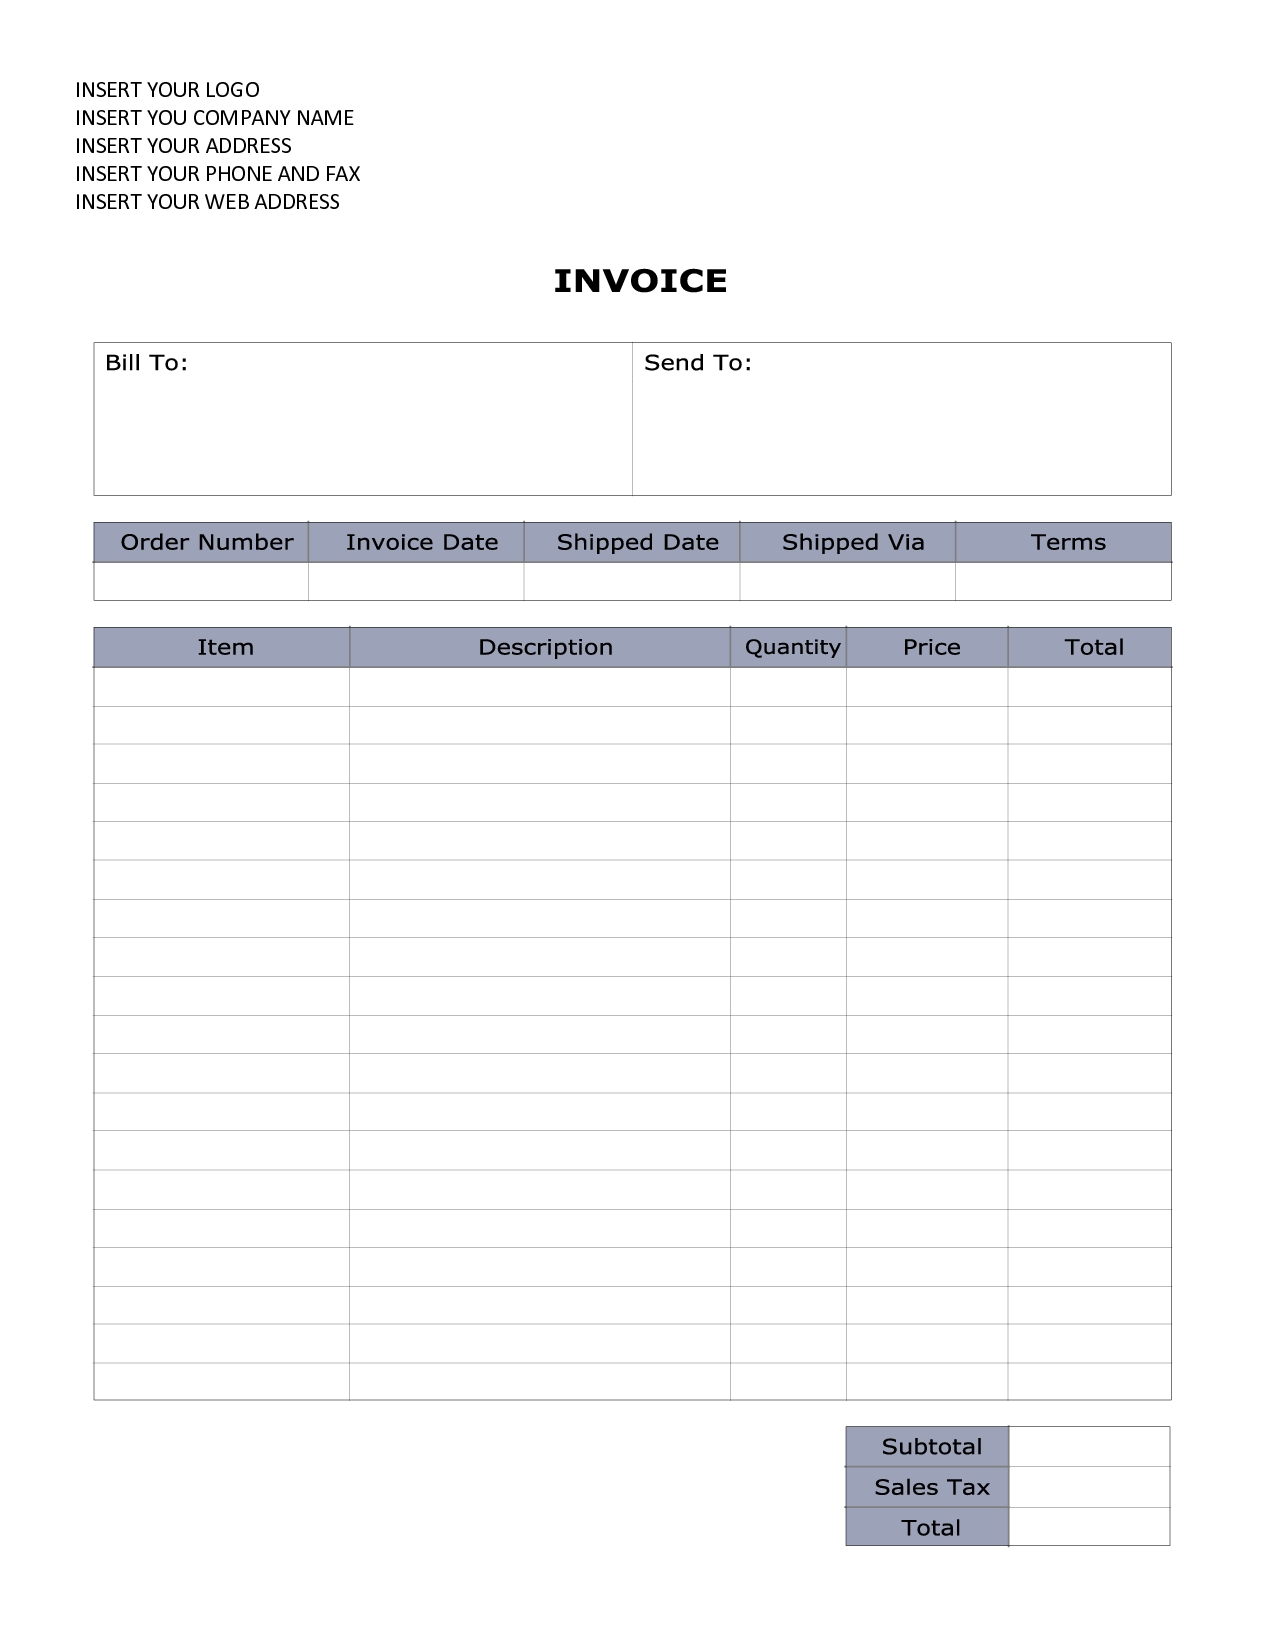 template invoice word free invoice template microsoft word sample invoice word